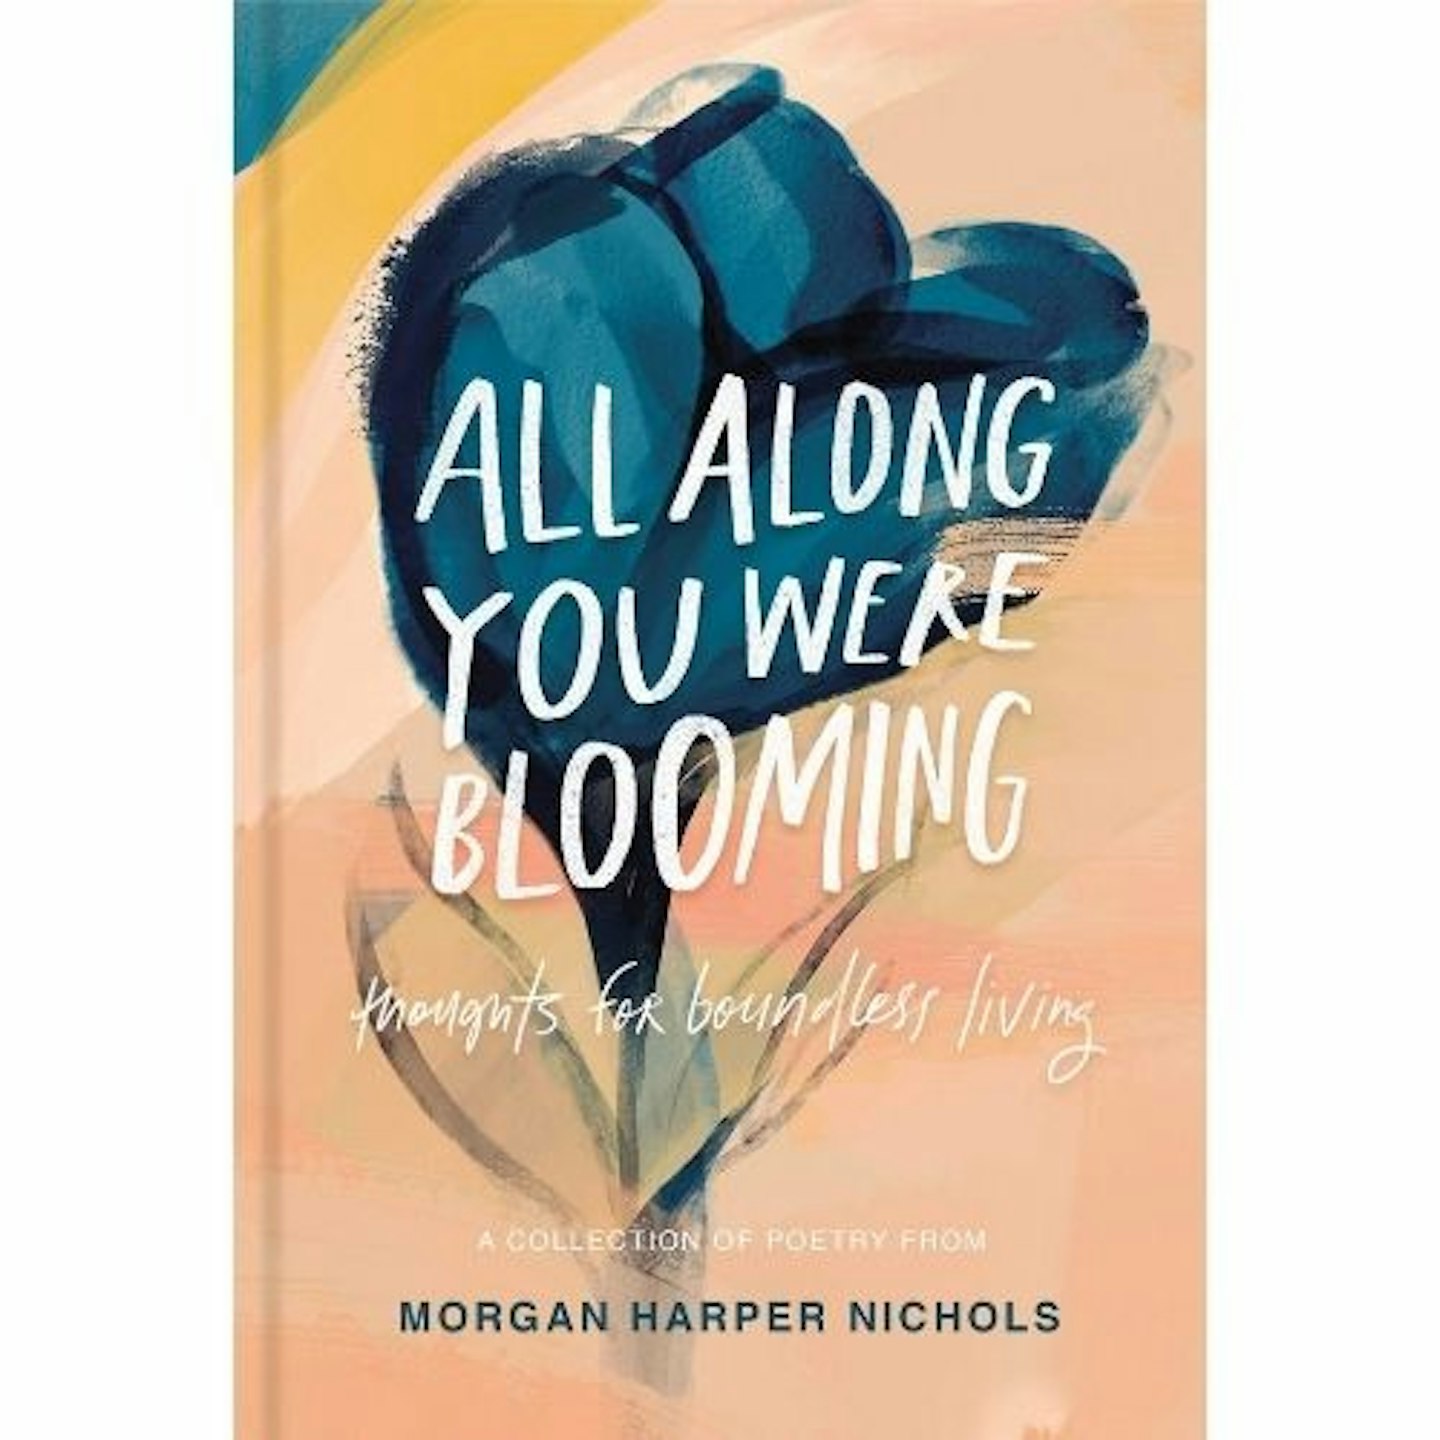 best wellbeing books - All Along You Were Blooming: Thoughts for Boundless Living by Morgan Harper Nichols